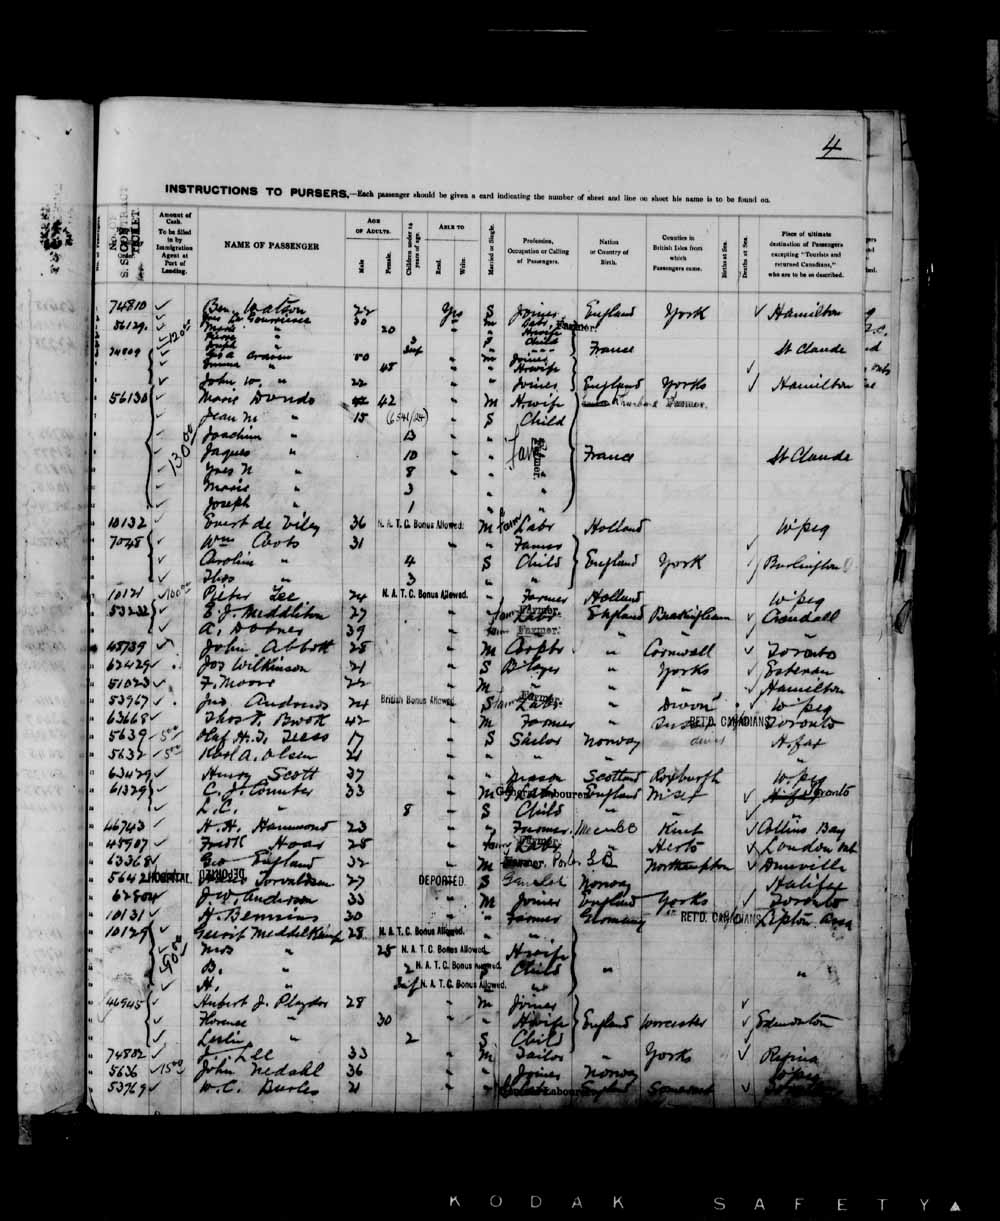 Digitized page of Quebec Passenger Lists for Image No.: e003698081